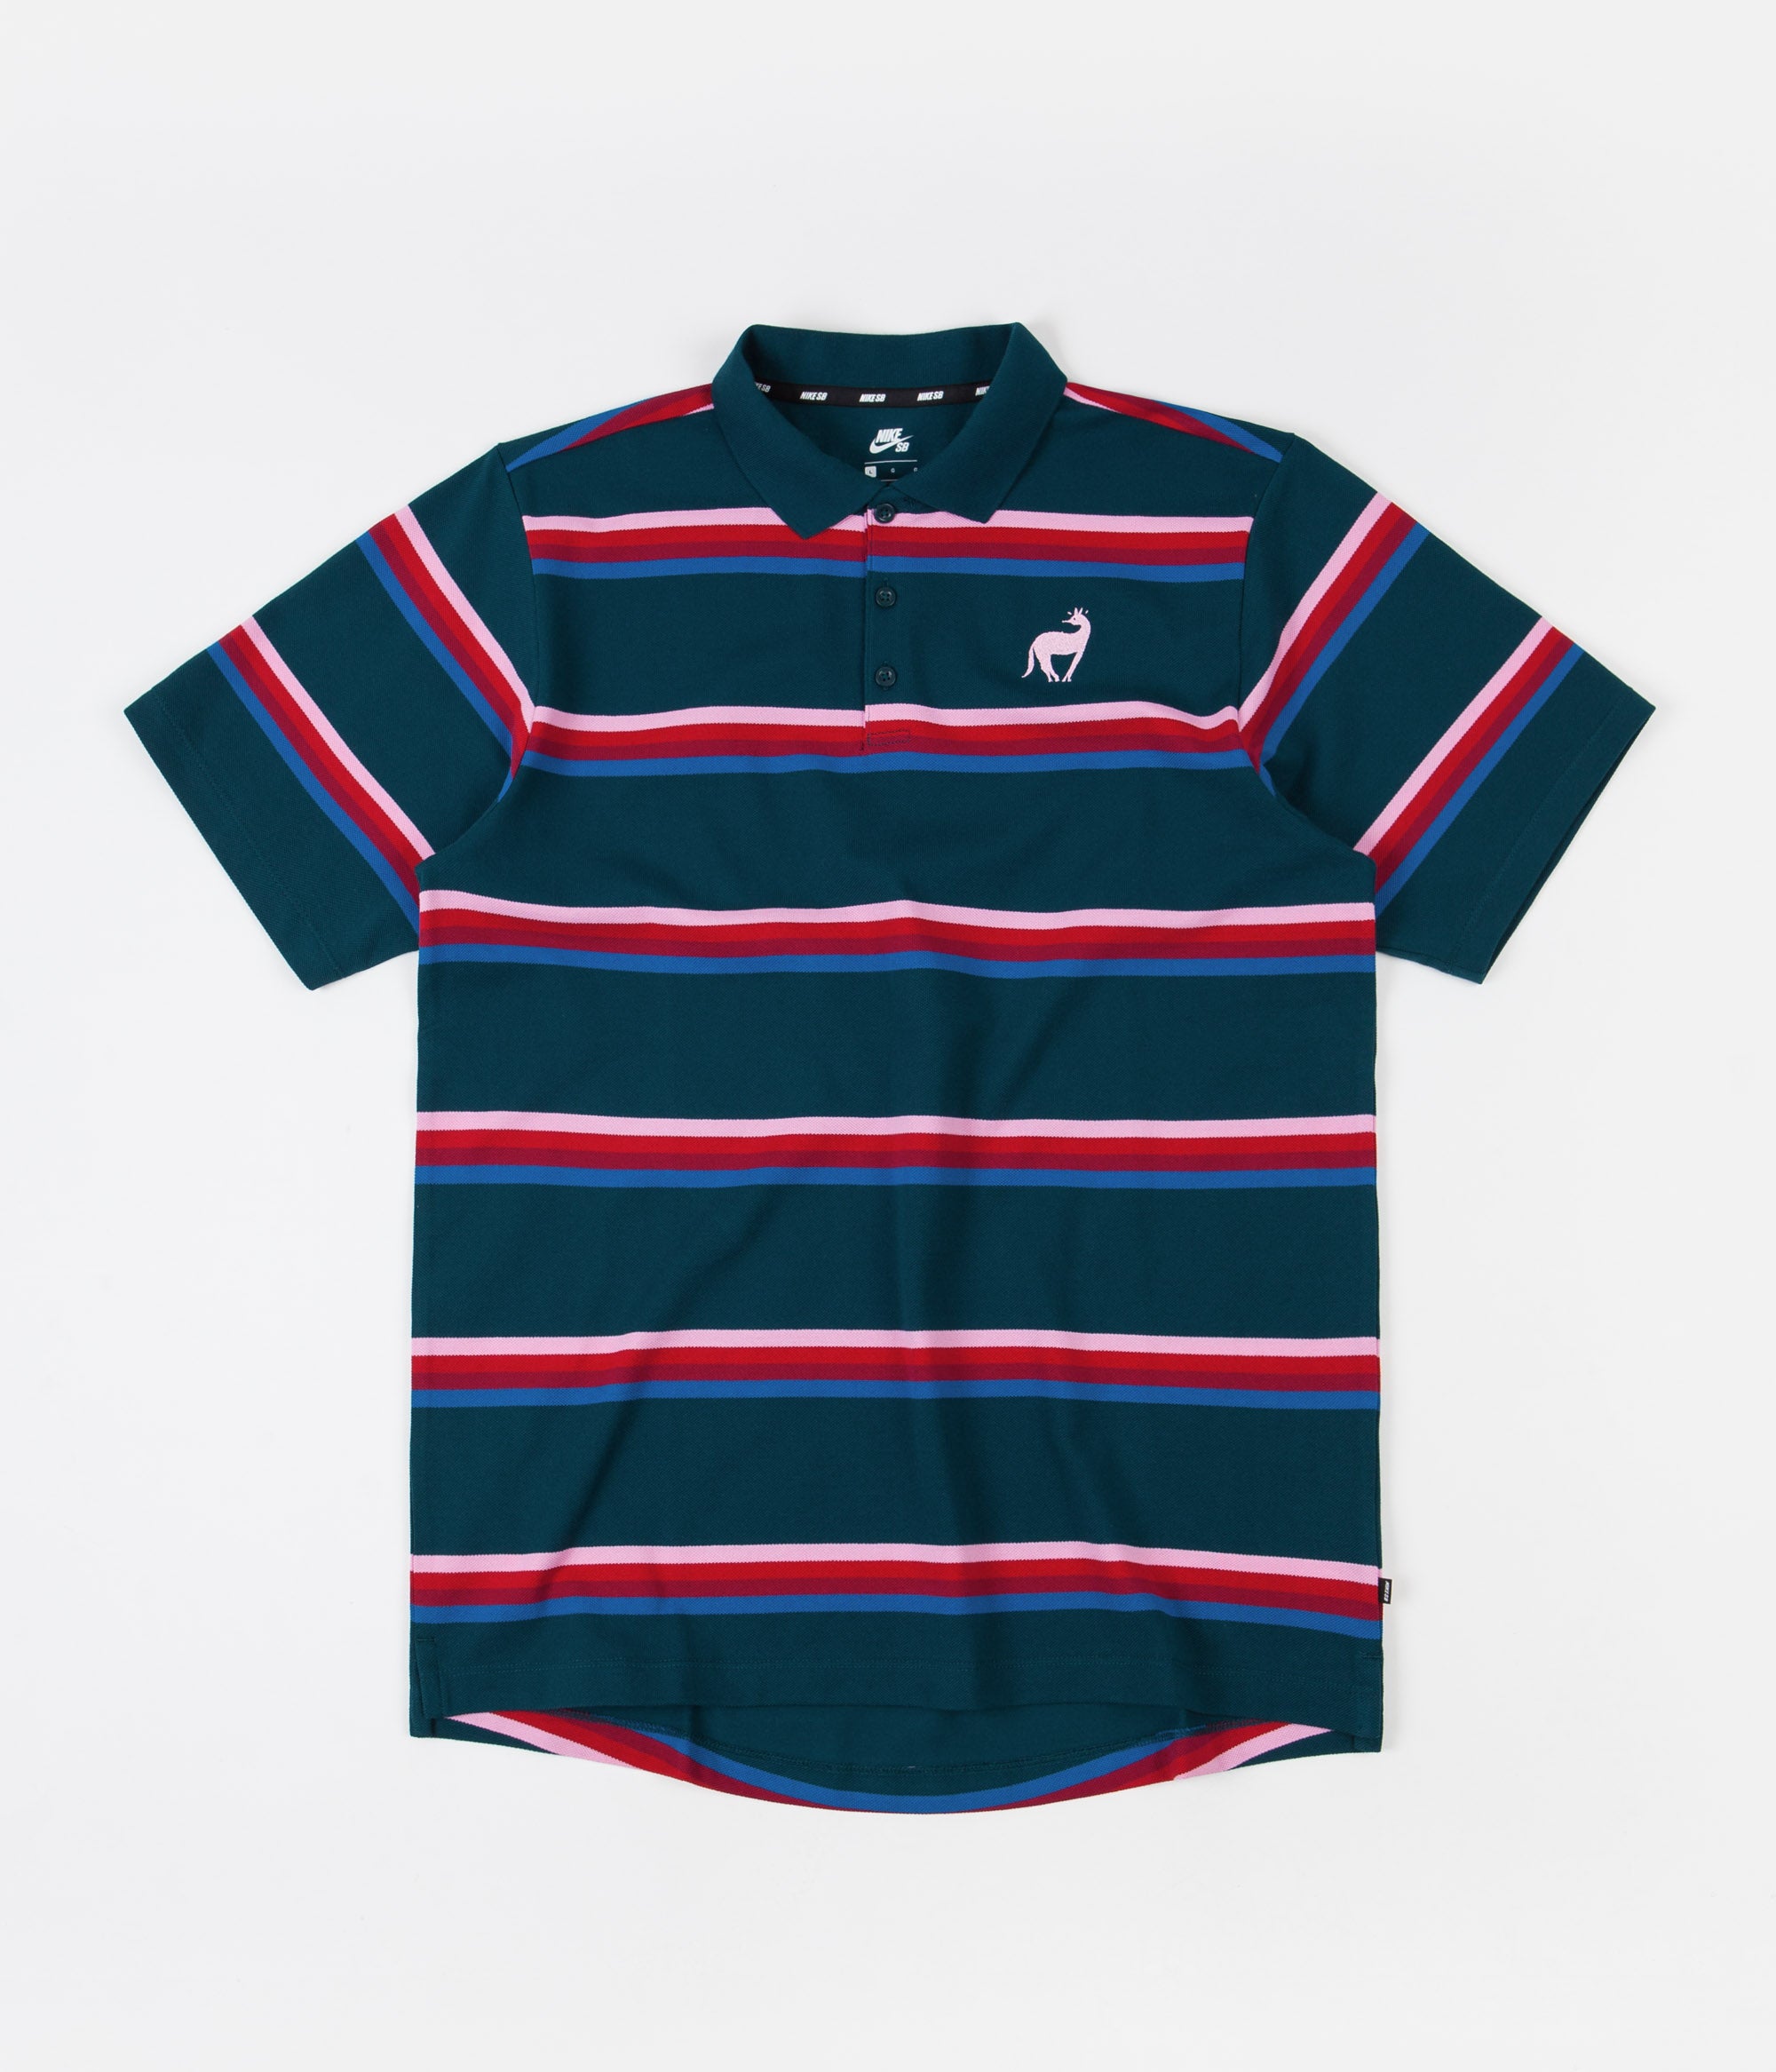 Nike SB x Parra Polo Shirt - Midnight Turquoise / Military Blue / Pink ...